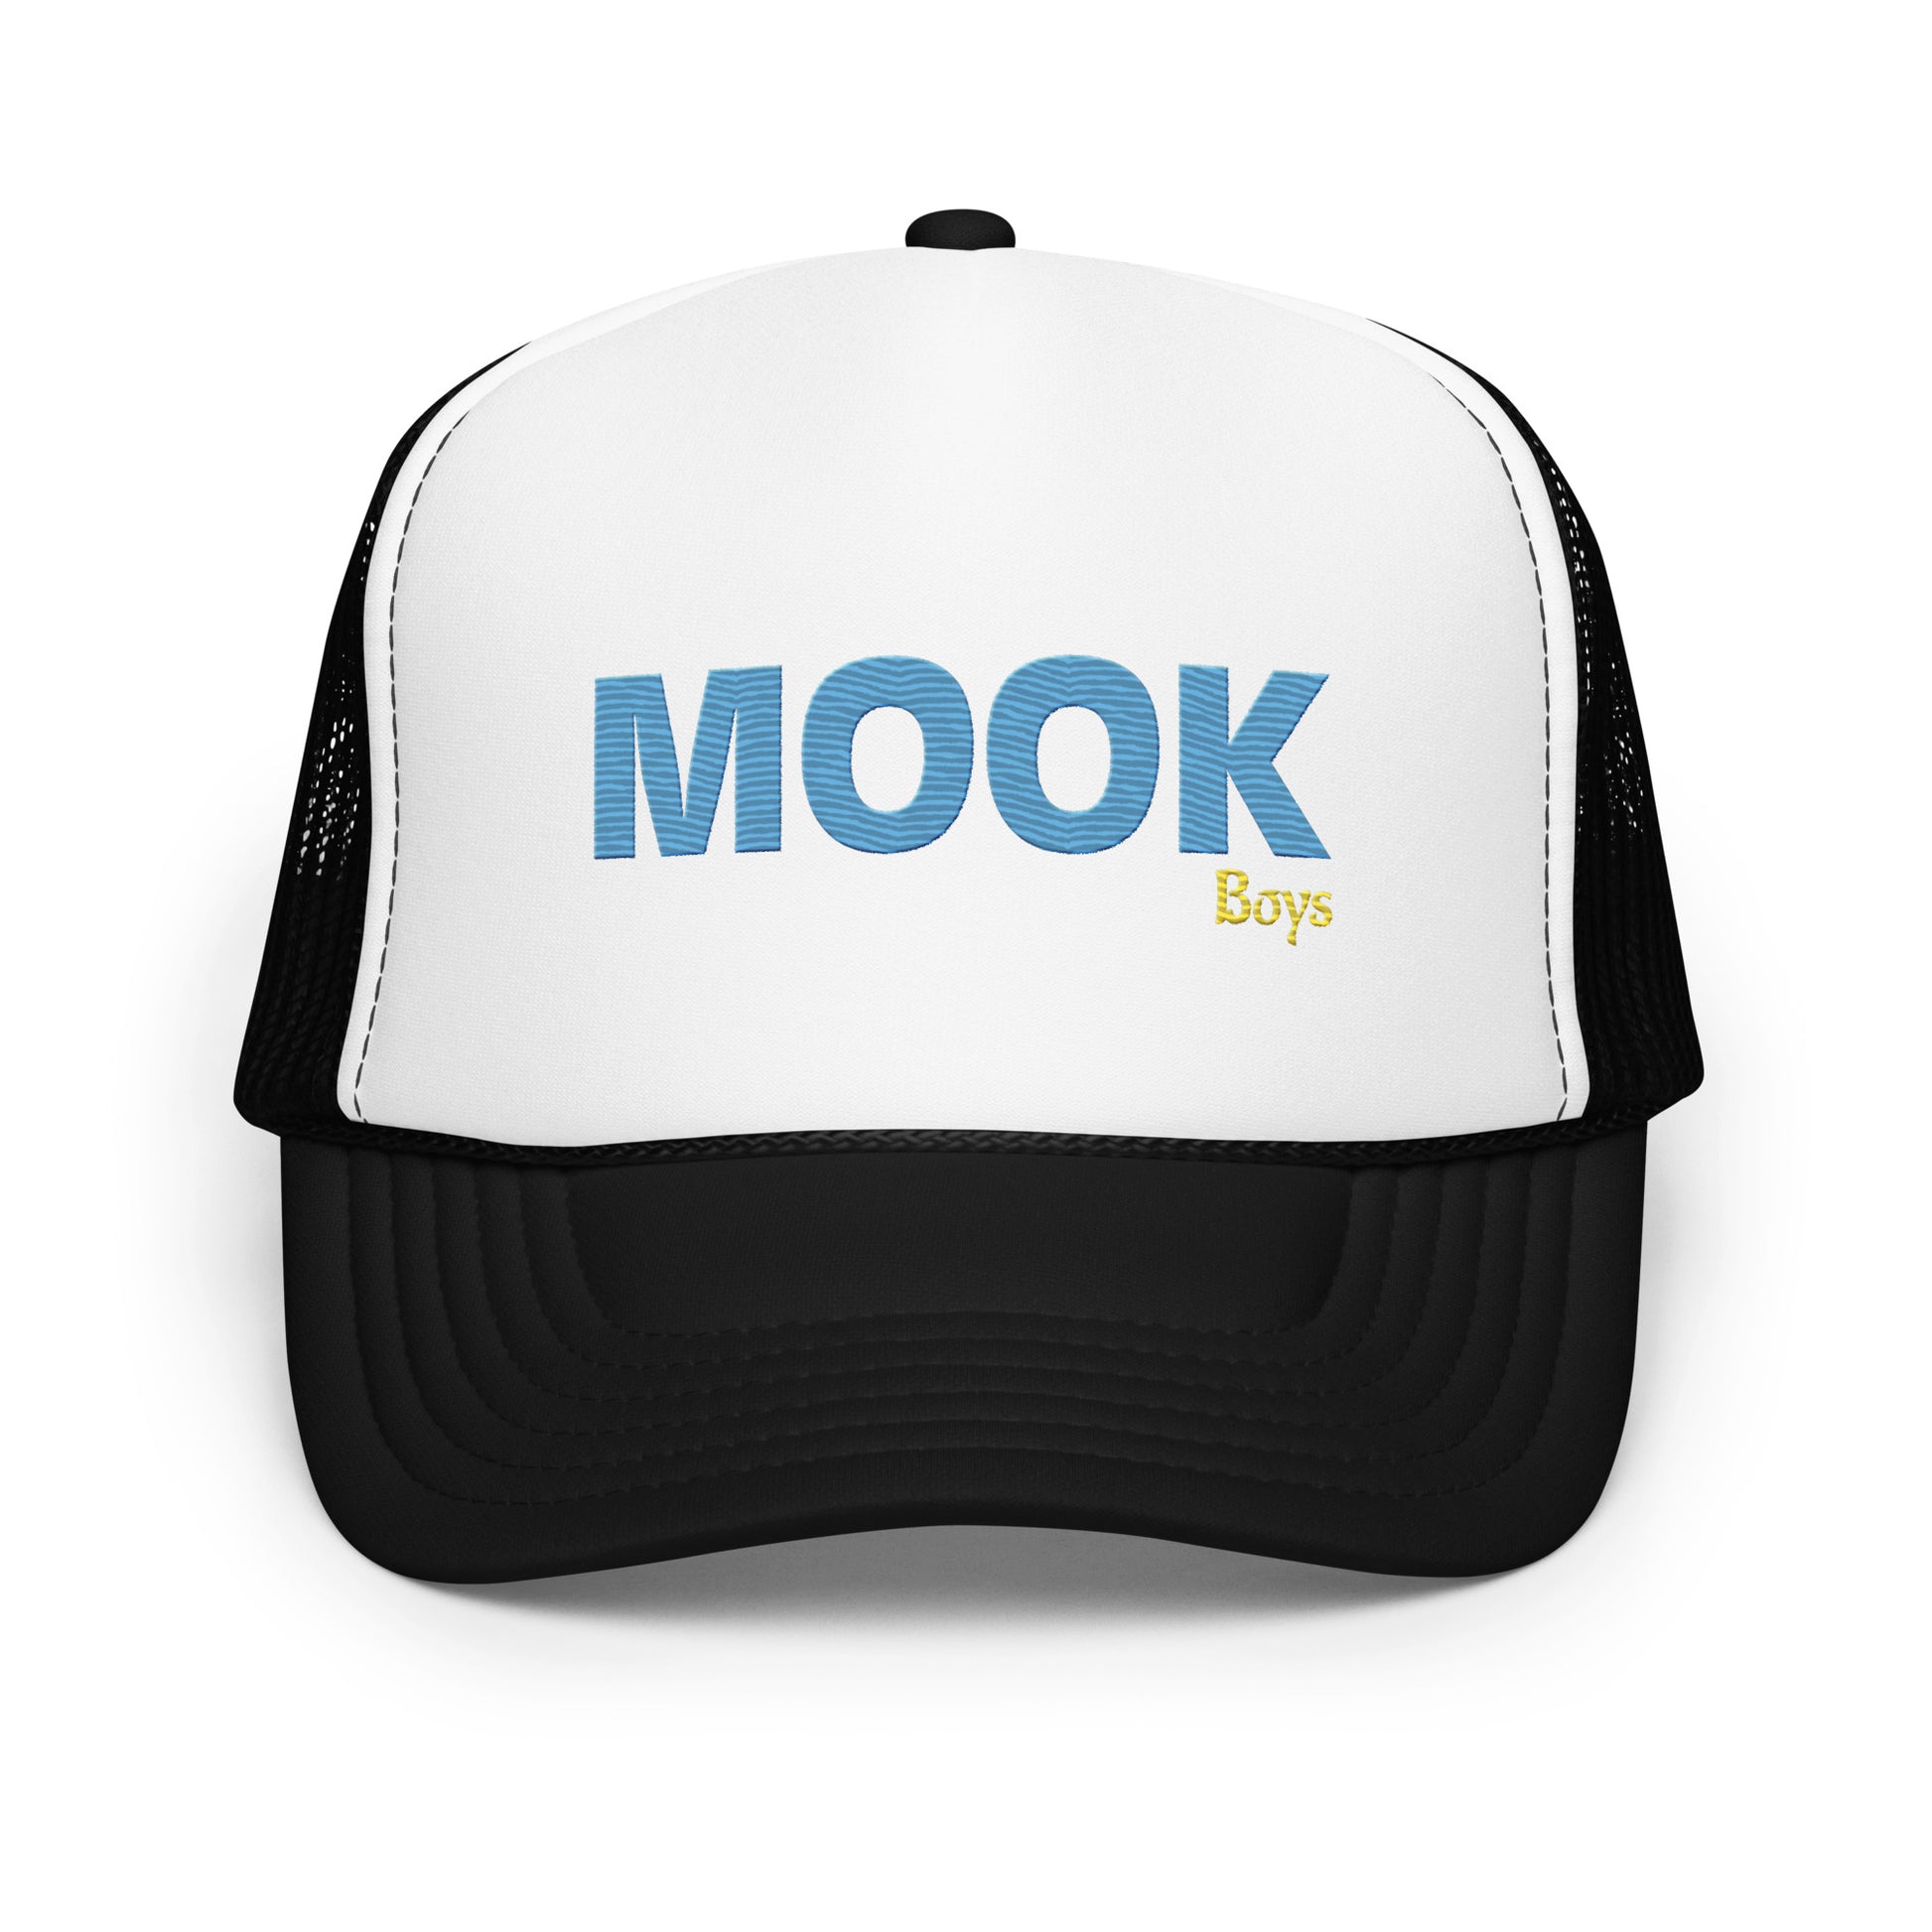 The Mook